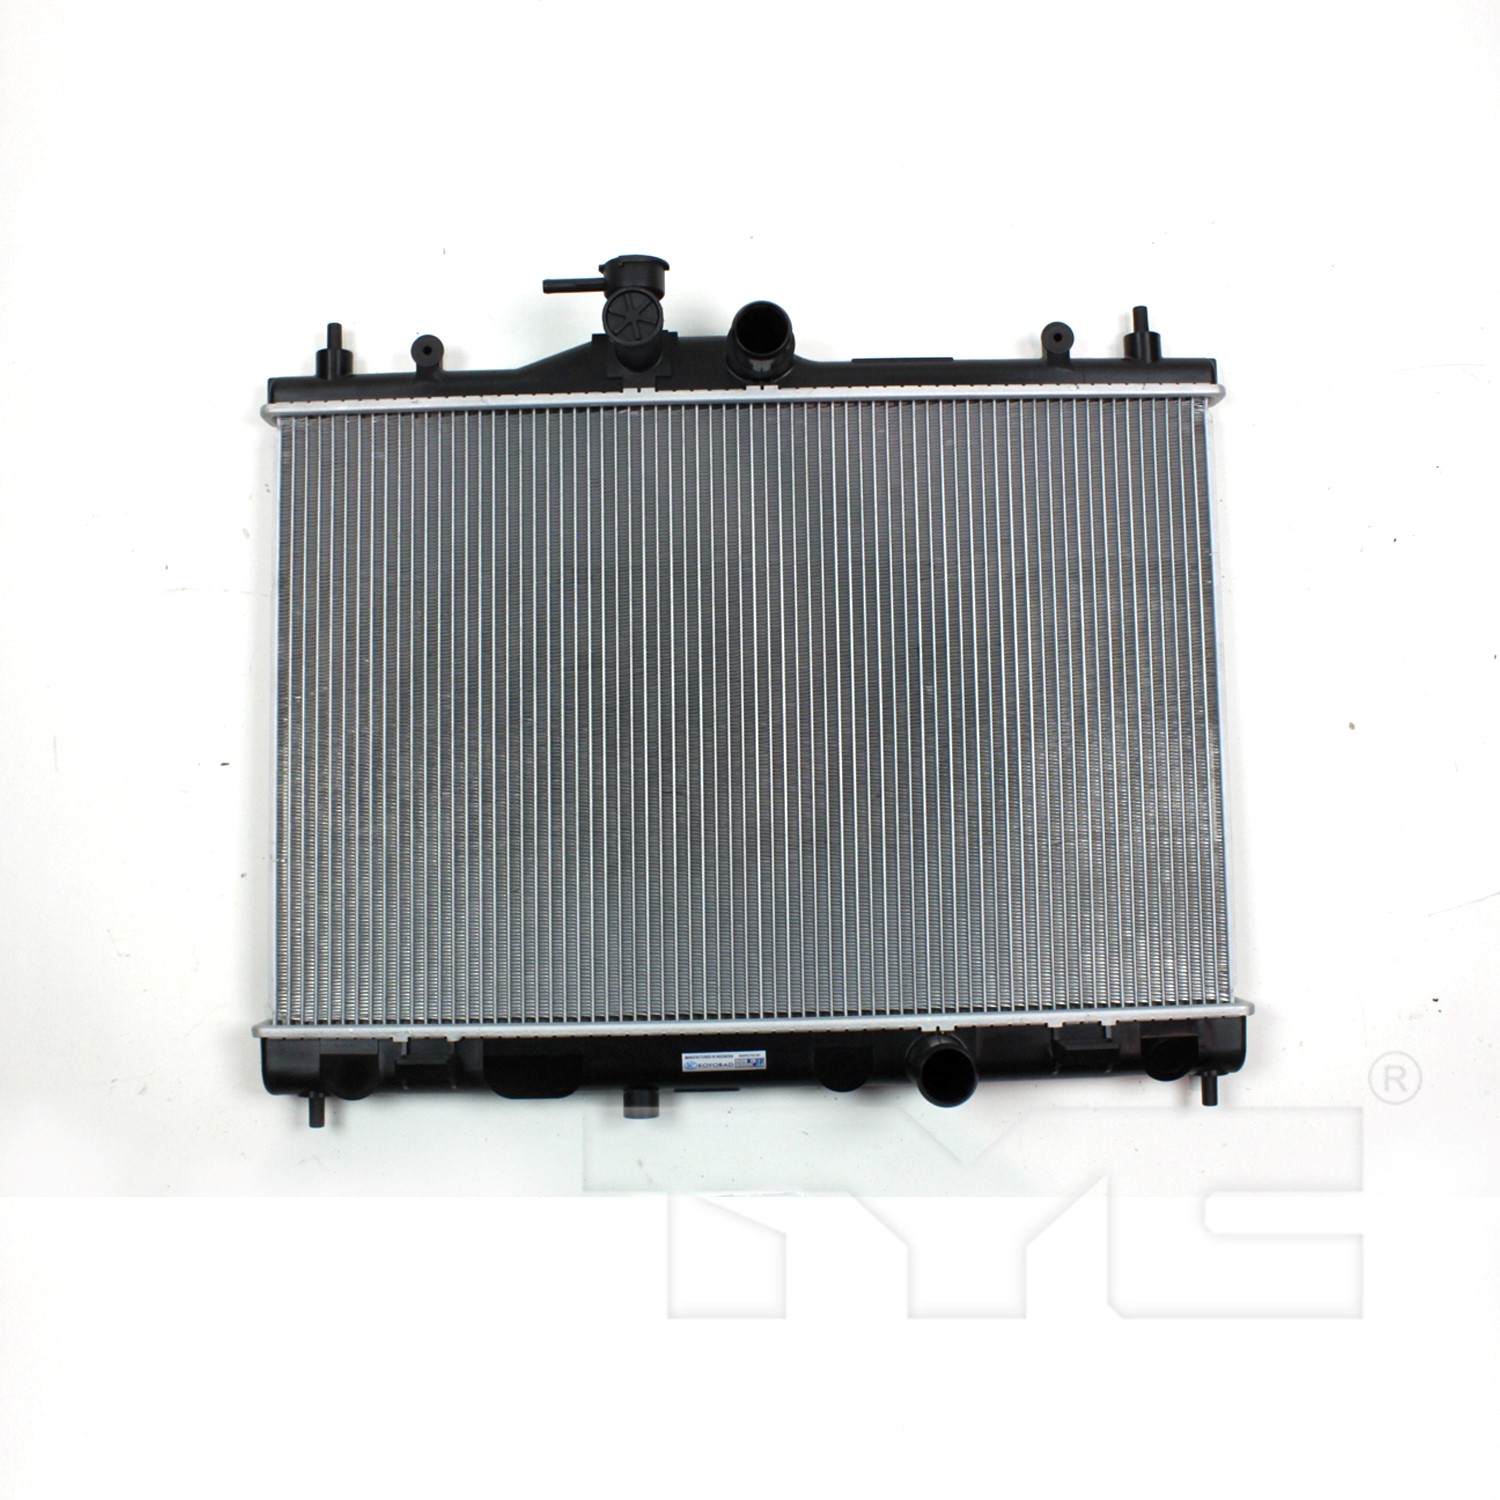 Aftermarket RADIATORS for NISSAN - CUBE, CUBE,09-14,Radiator assembly